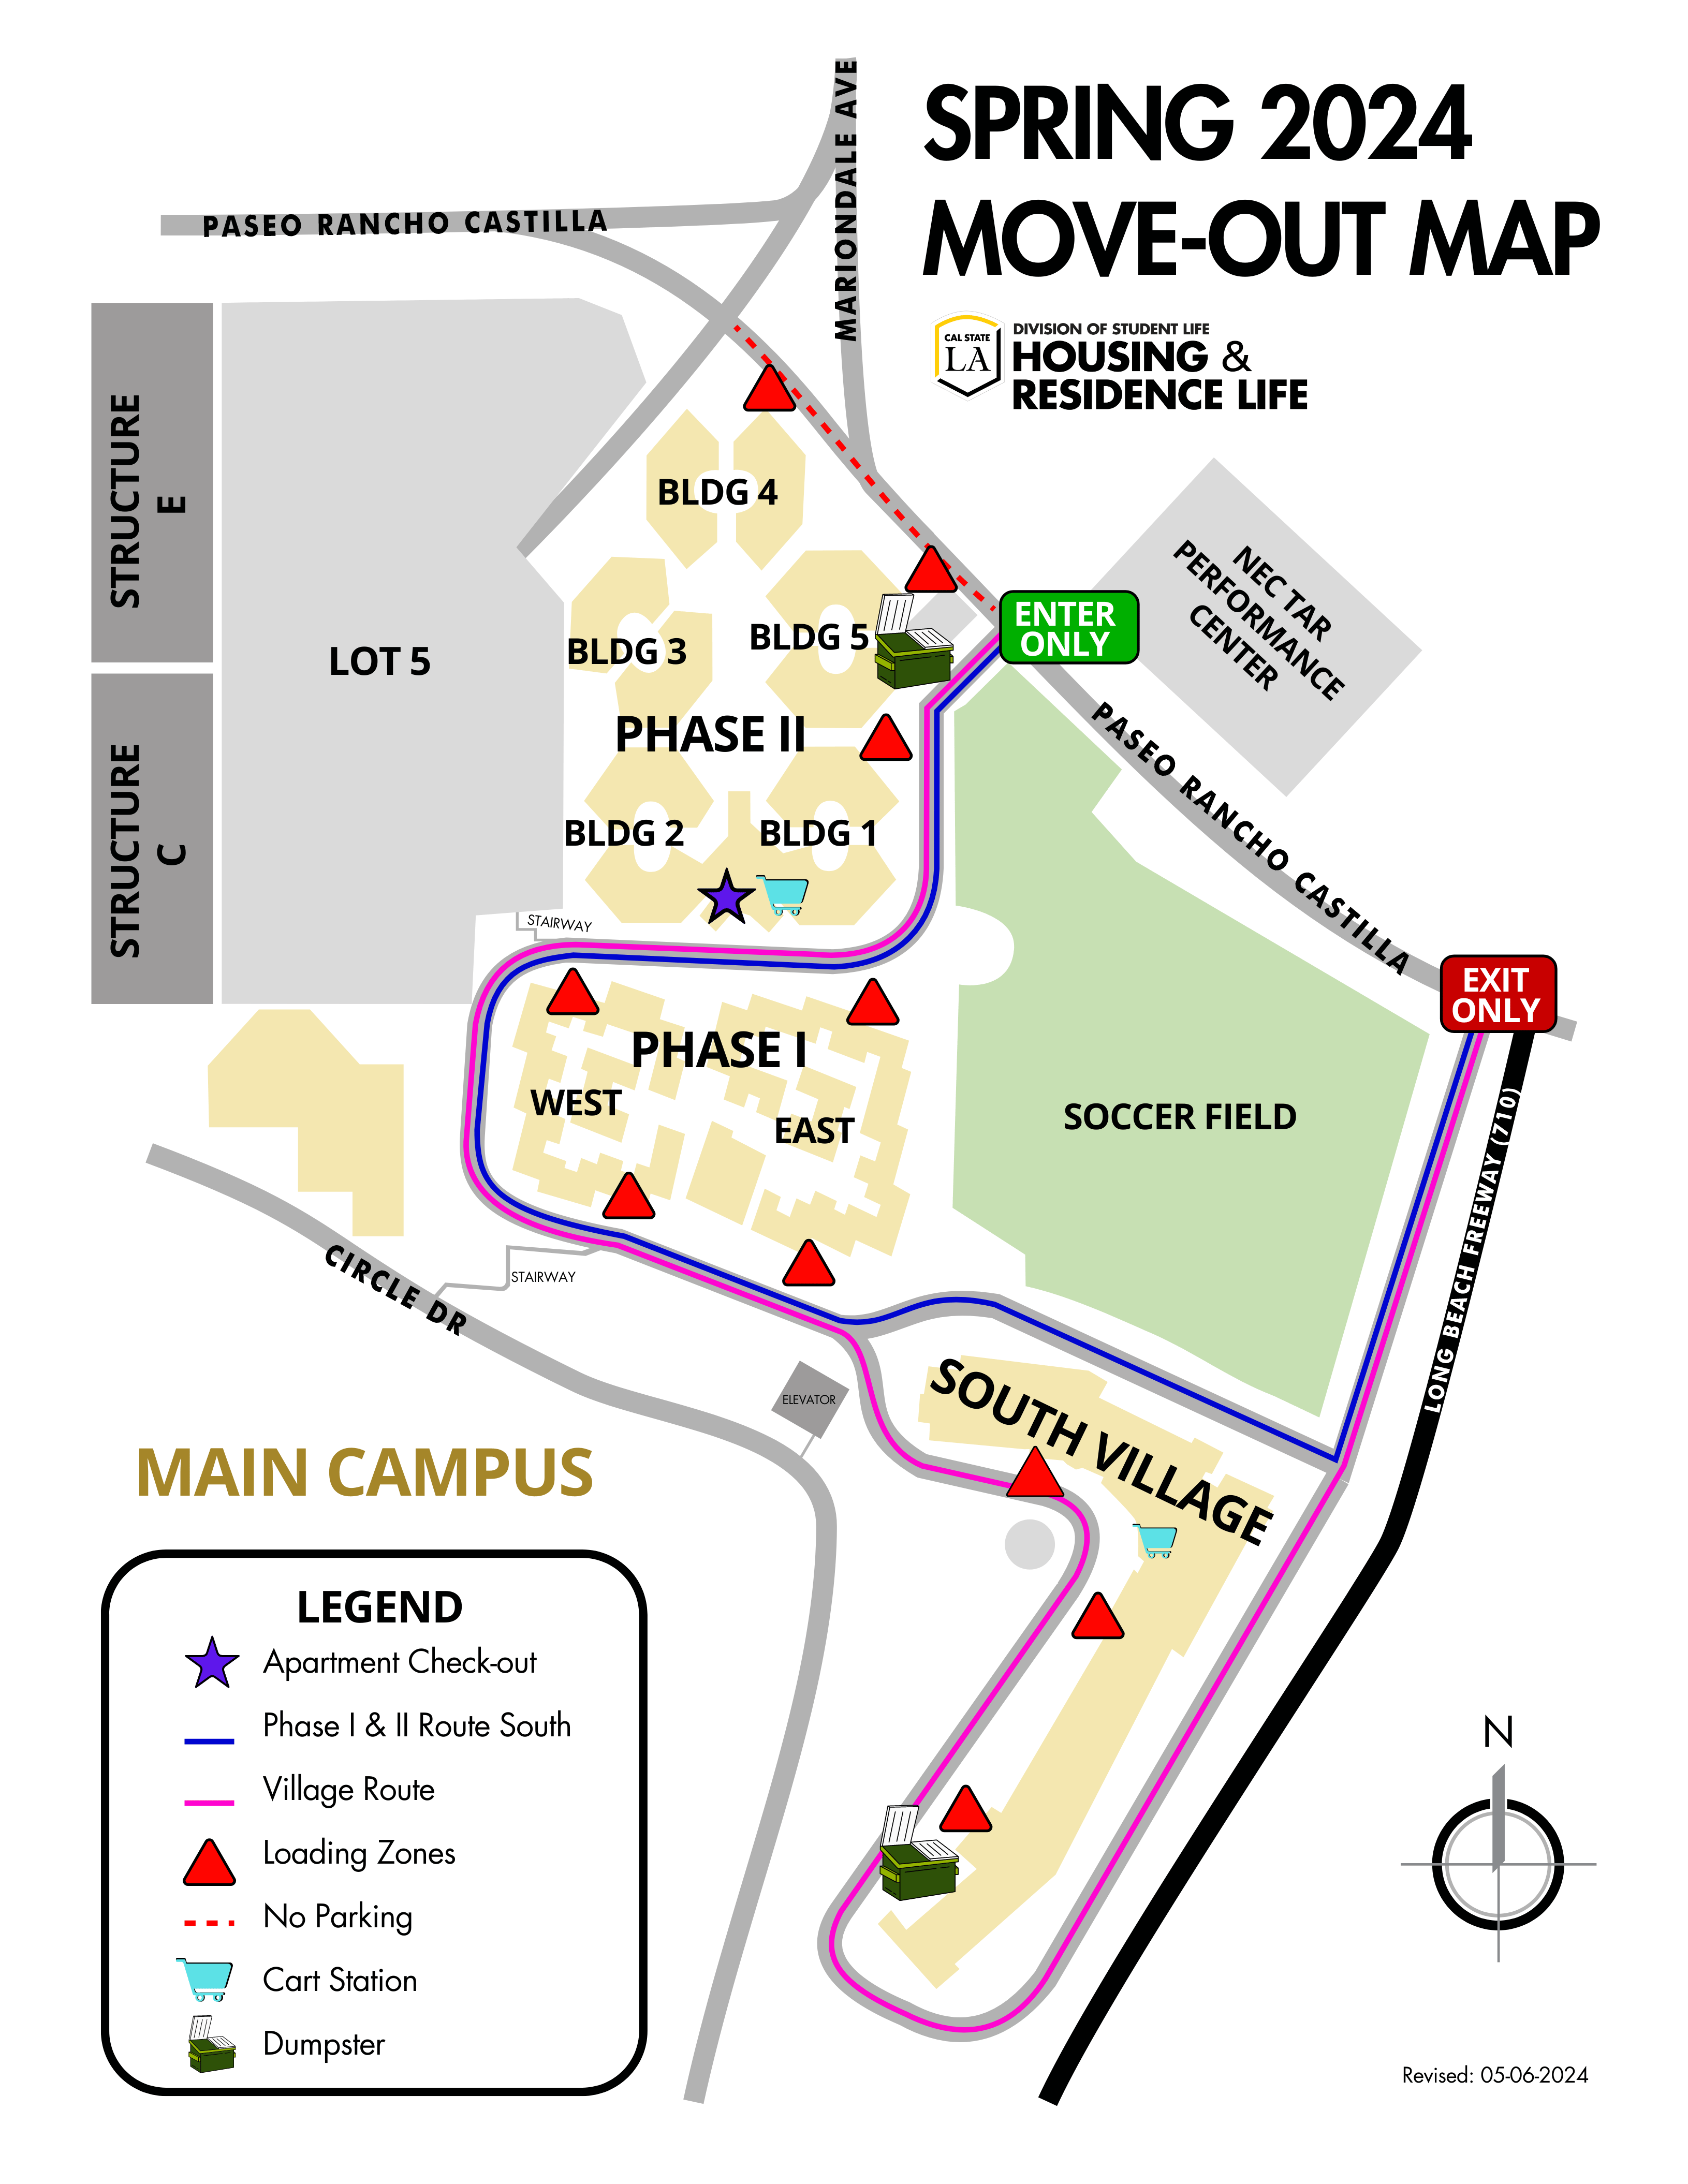 Spring 2024 move-out map. 